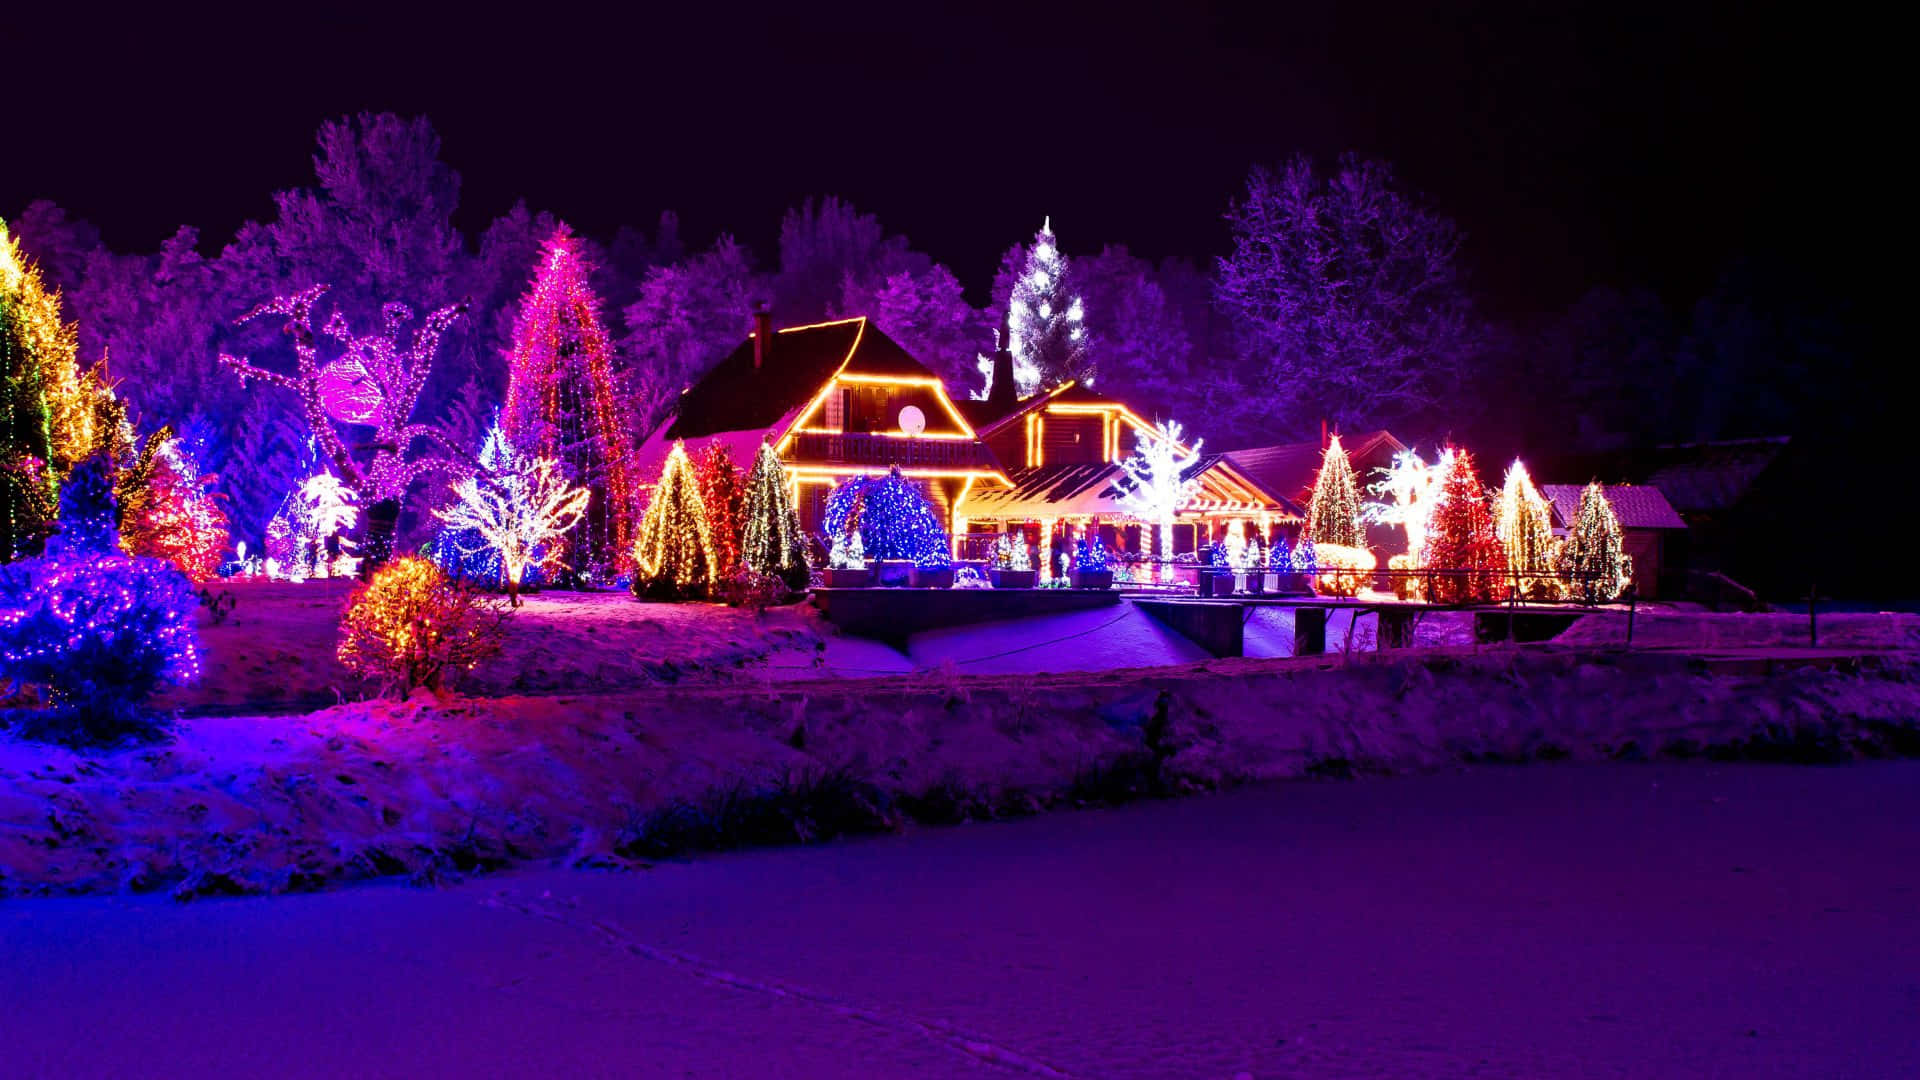 Enjoy the enchantment of a traditional Christmas Village Wallpaper